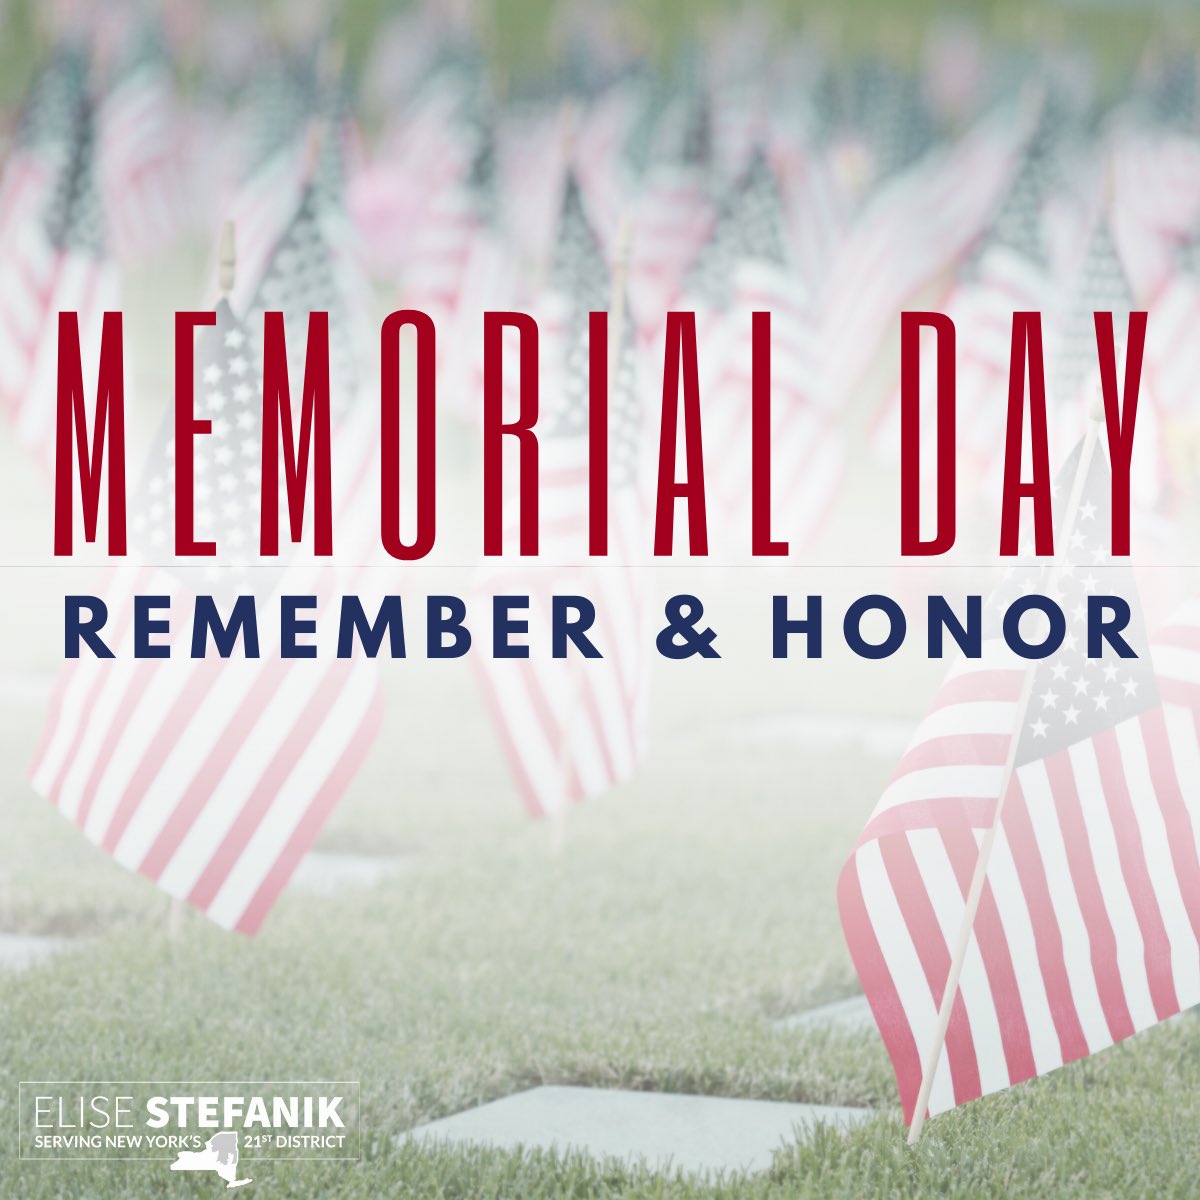 This #MemorialDay, please join me in honoring the men and women who made the ultimate sacrifice in defense of our nation.  Have a safe and reflective Memorial Day with your loved ones. 🇺🇲